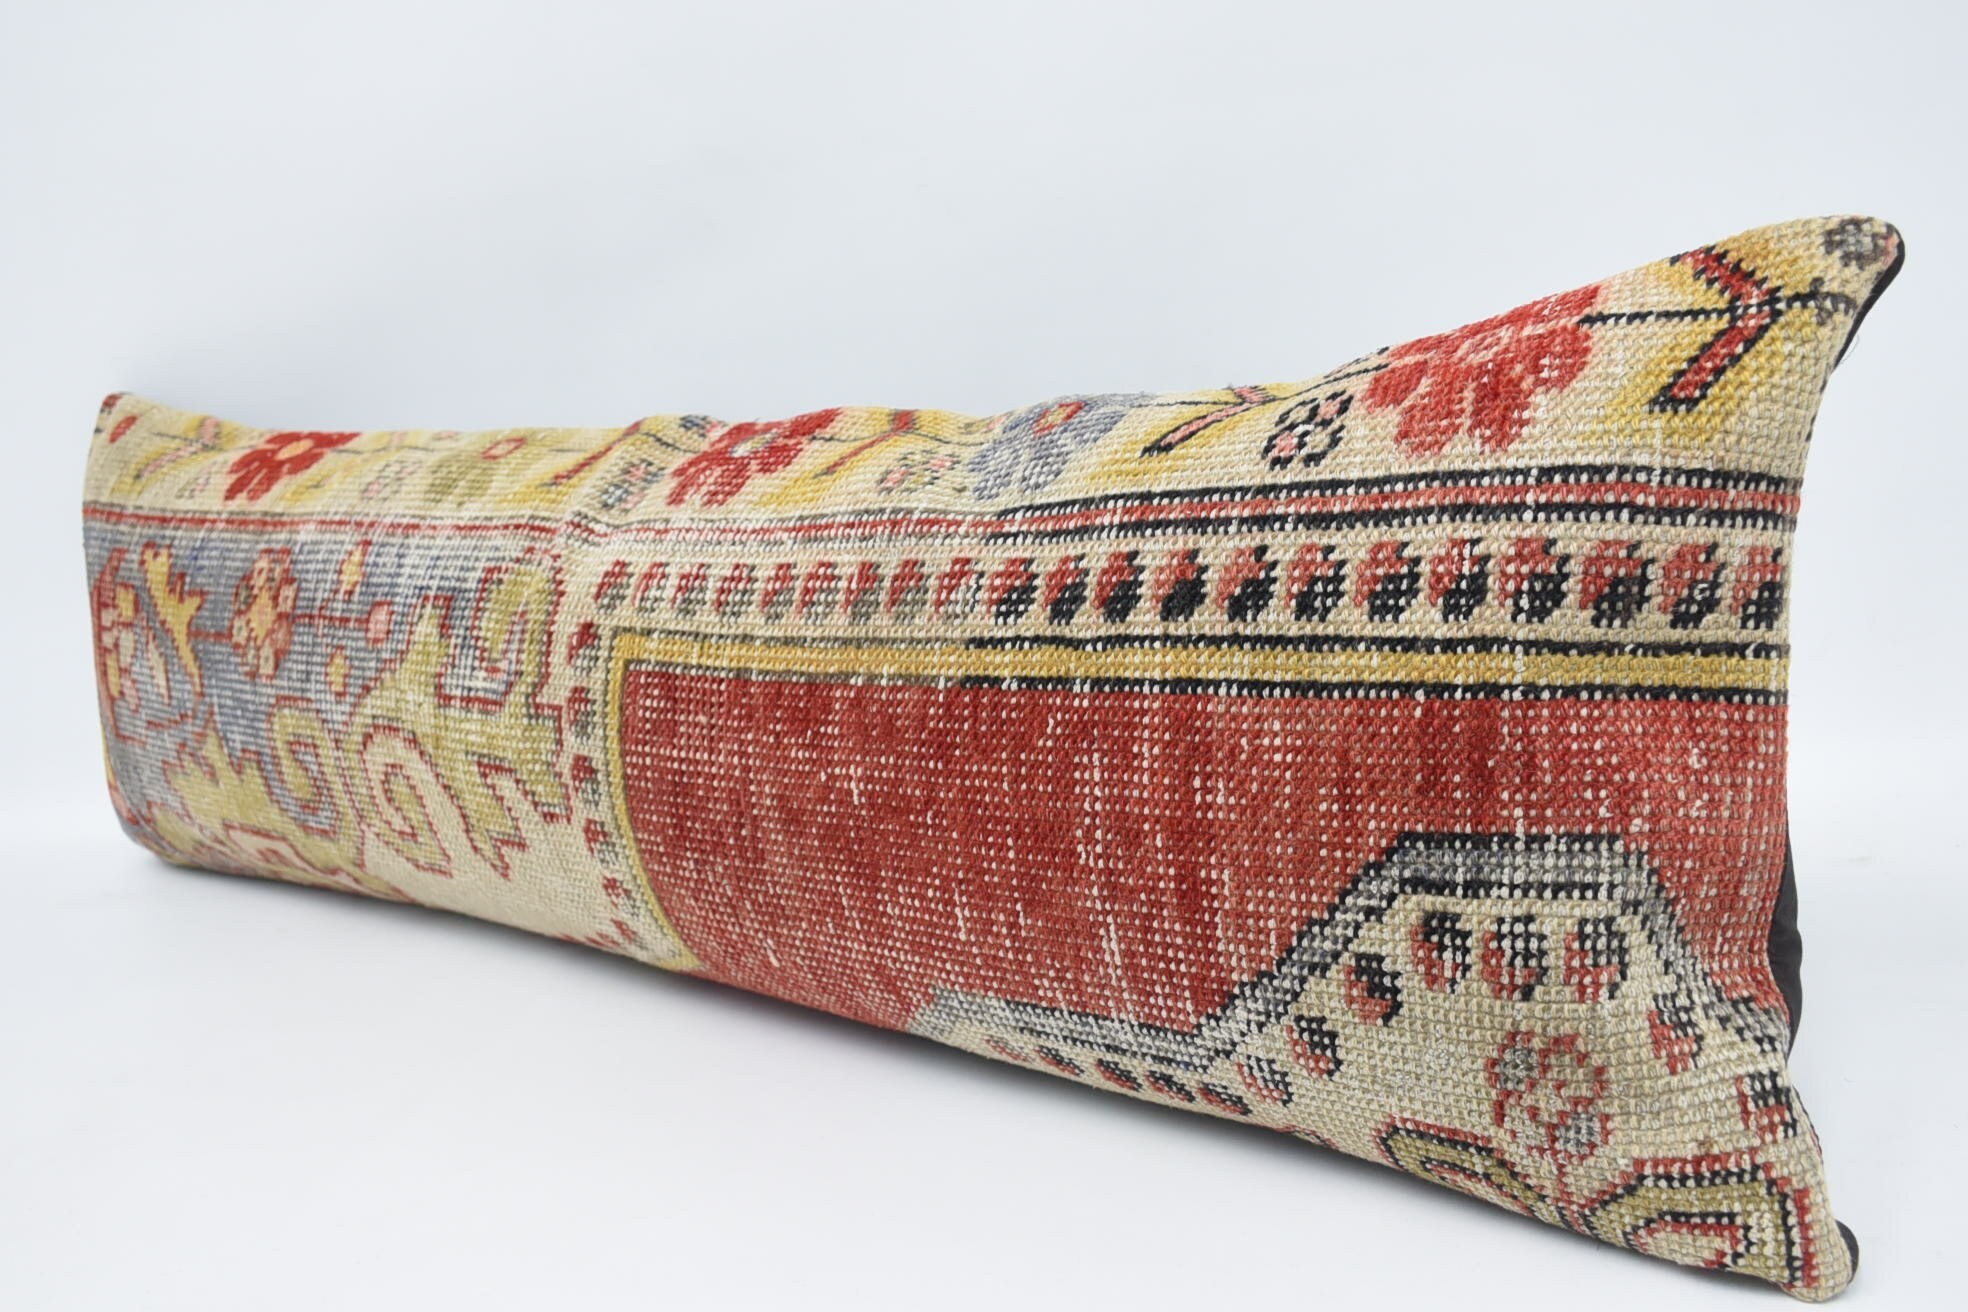 Throw Kilim Pillow, Pillow for Sofa, One Of A Kind Pillow Case, 16"x48" Red Pillow, Kilim Pillow Cover, Turkish Rugs Pillow